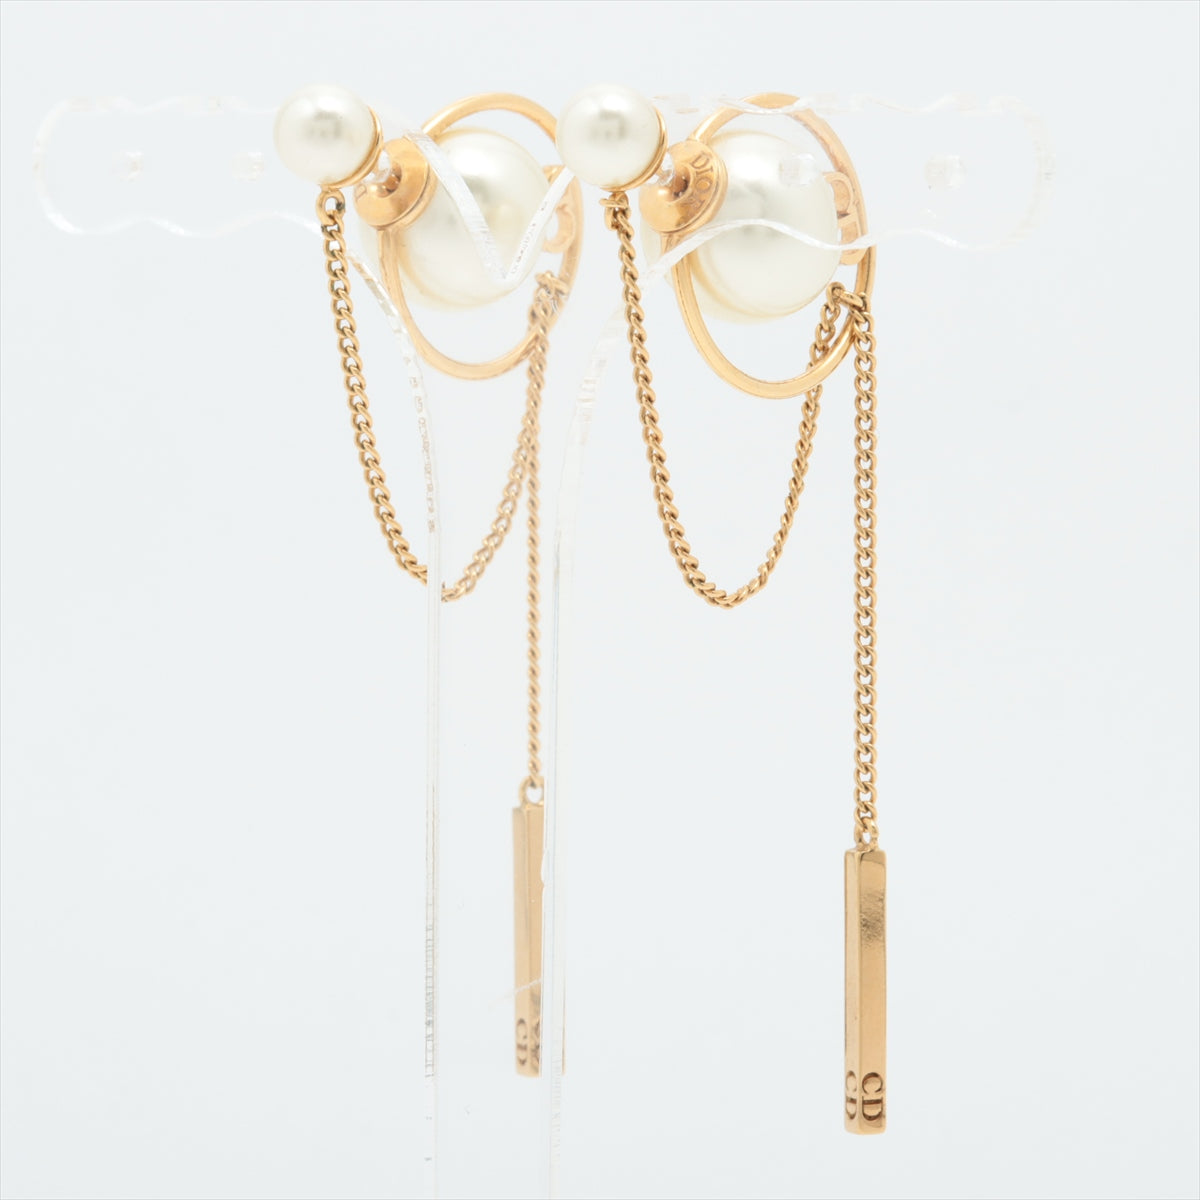 DIOR Dior Tribales  DIOR Tribal Piercing jewelry (for both ears) GP x fake pearl Gold